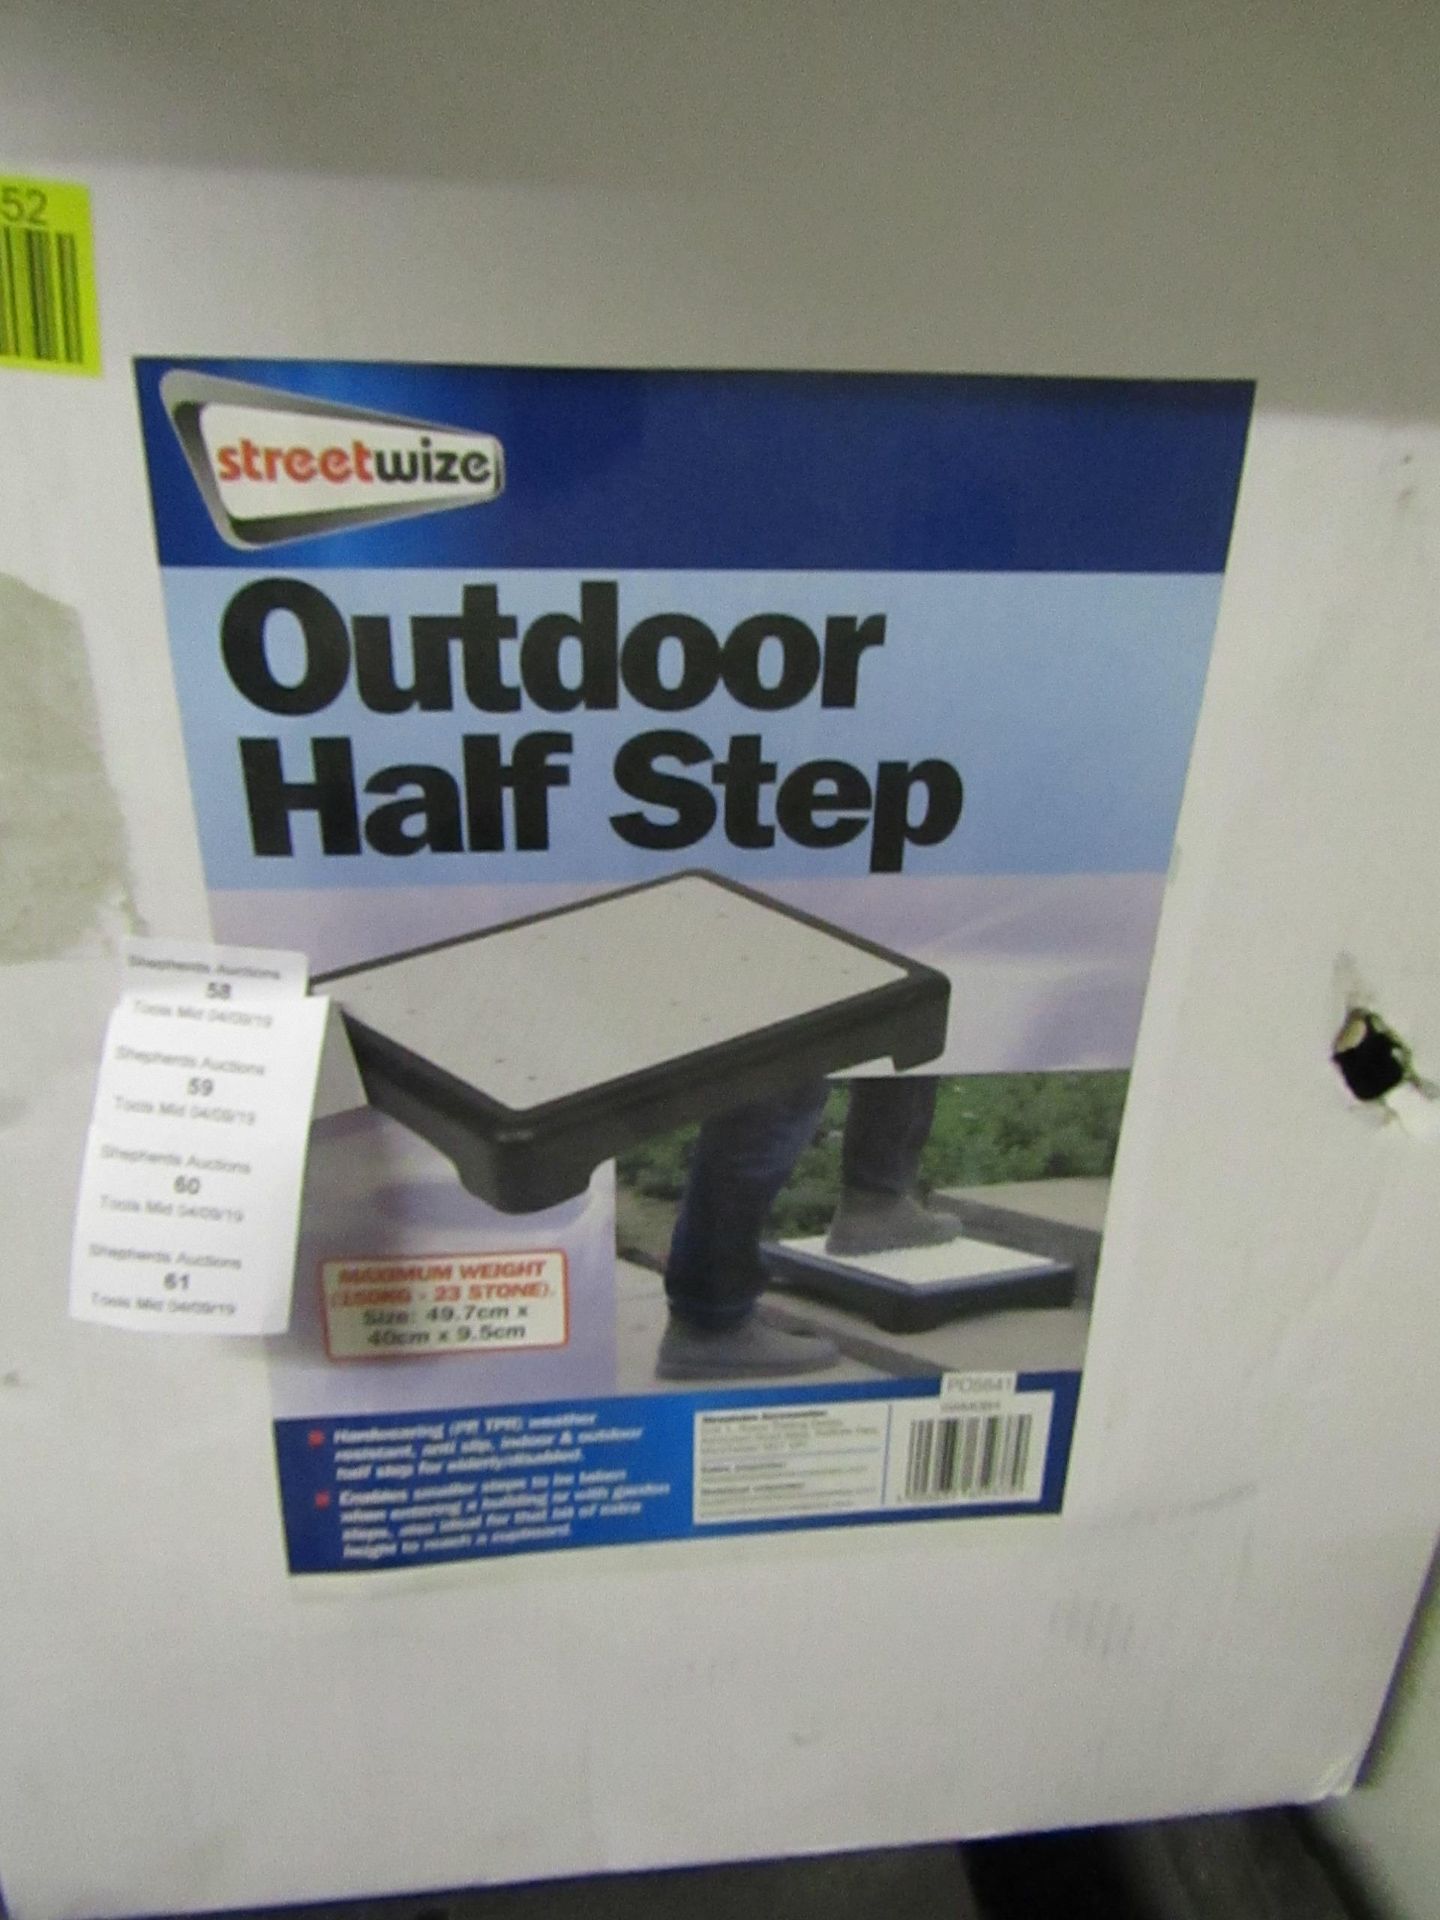 Streetwize outdoor half step, unchecked and boxed.